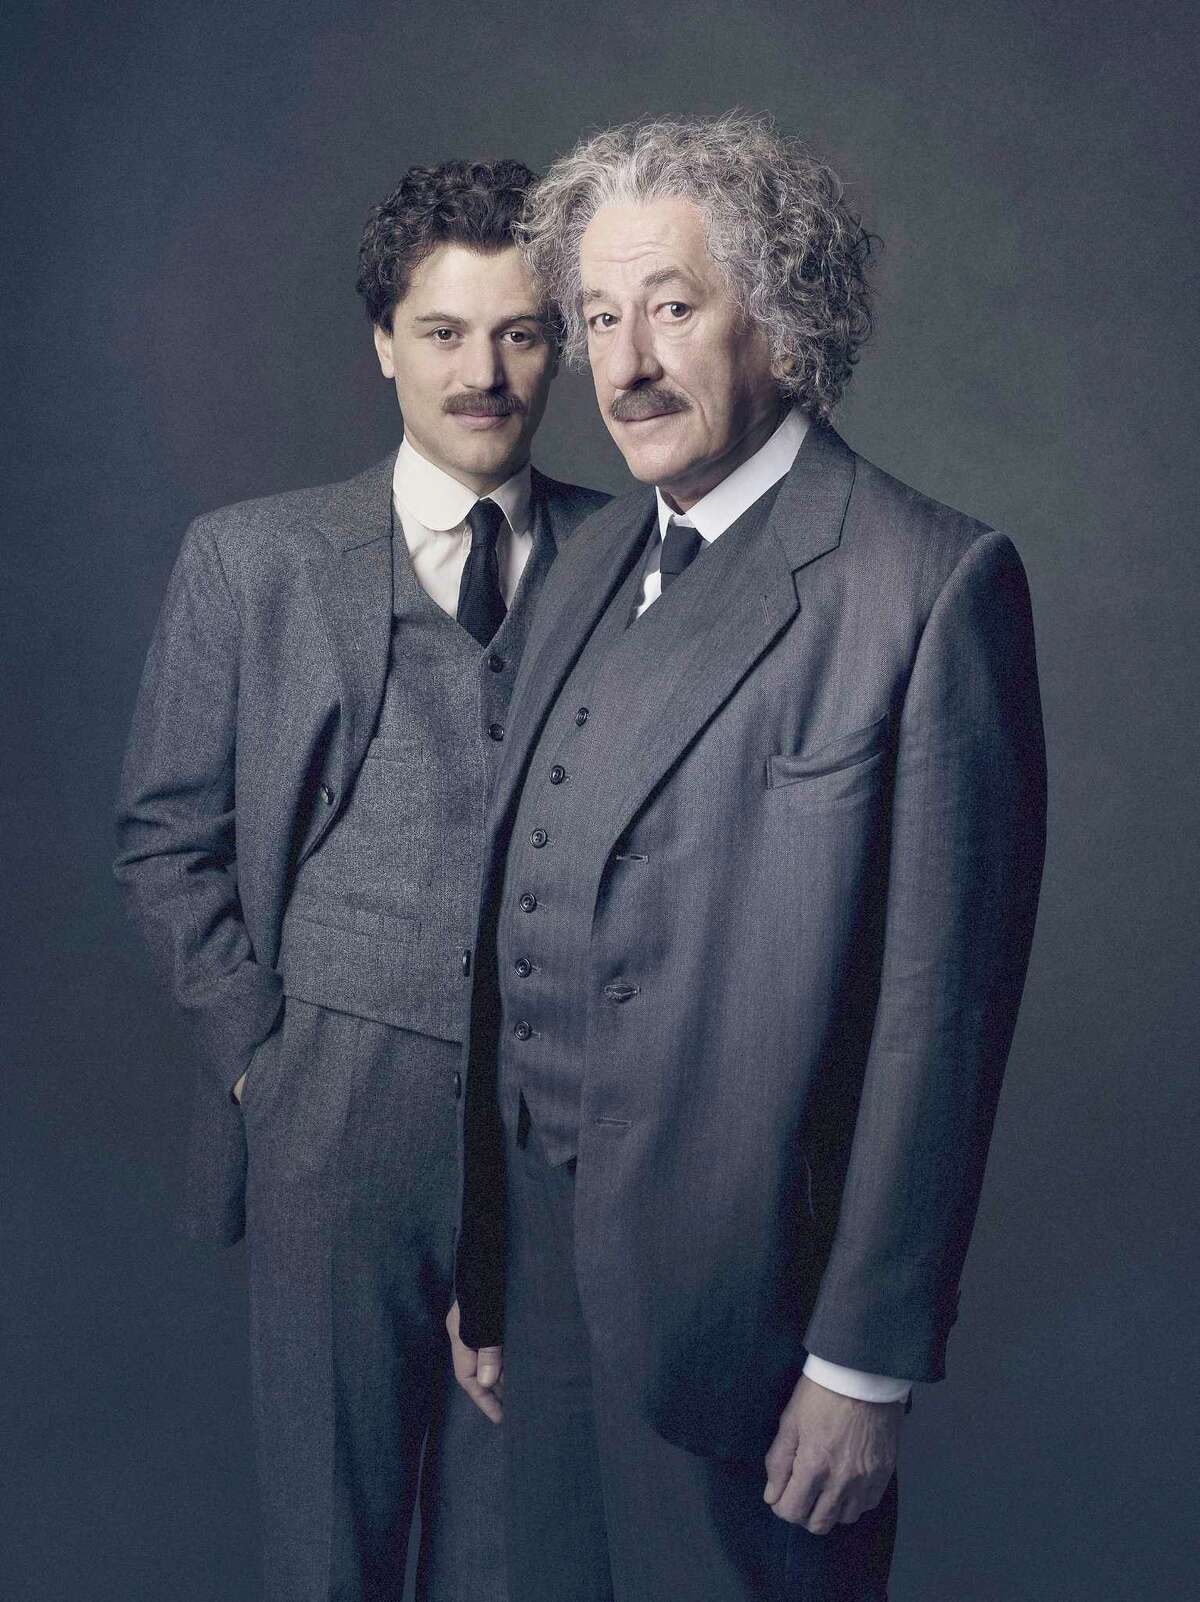 Johnny Flynn, left, plays Albert Einstein as a young man and Academy Award winning Geoffrey Rush plays him as an older man in National Geographic's new series, "Genius," premiering Tuesday.